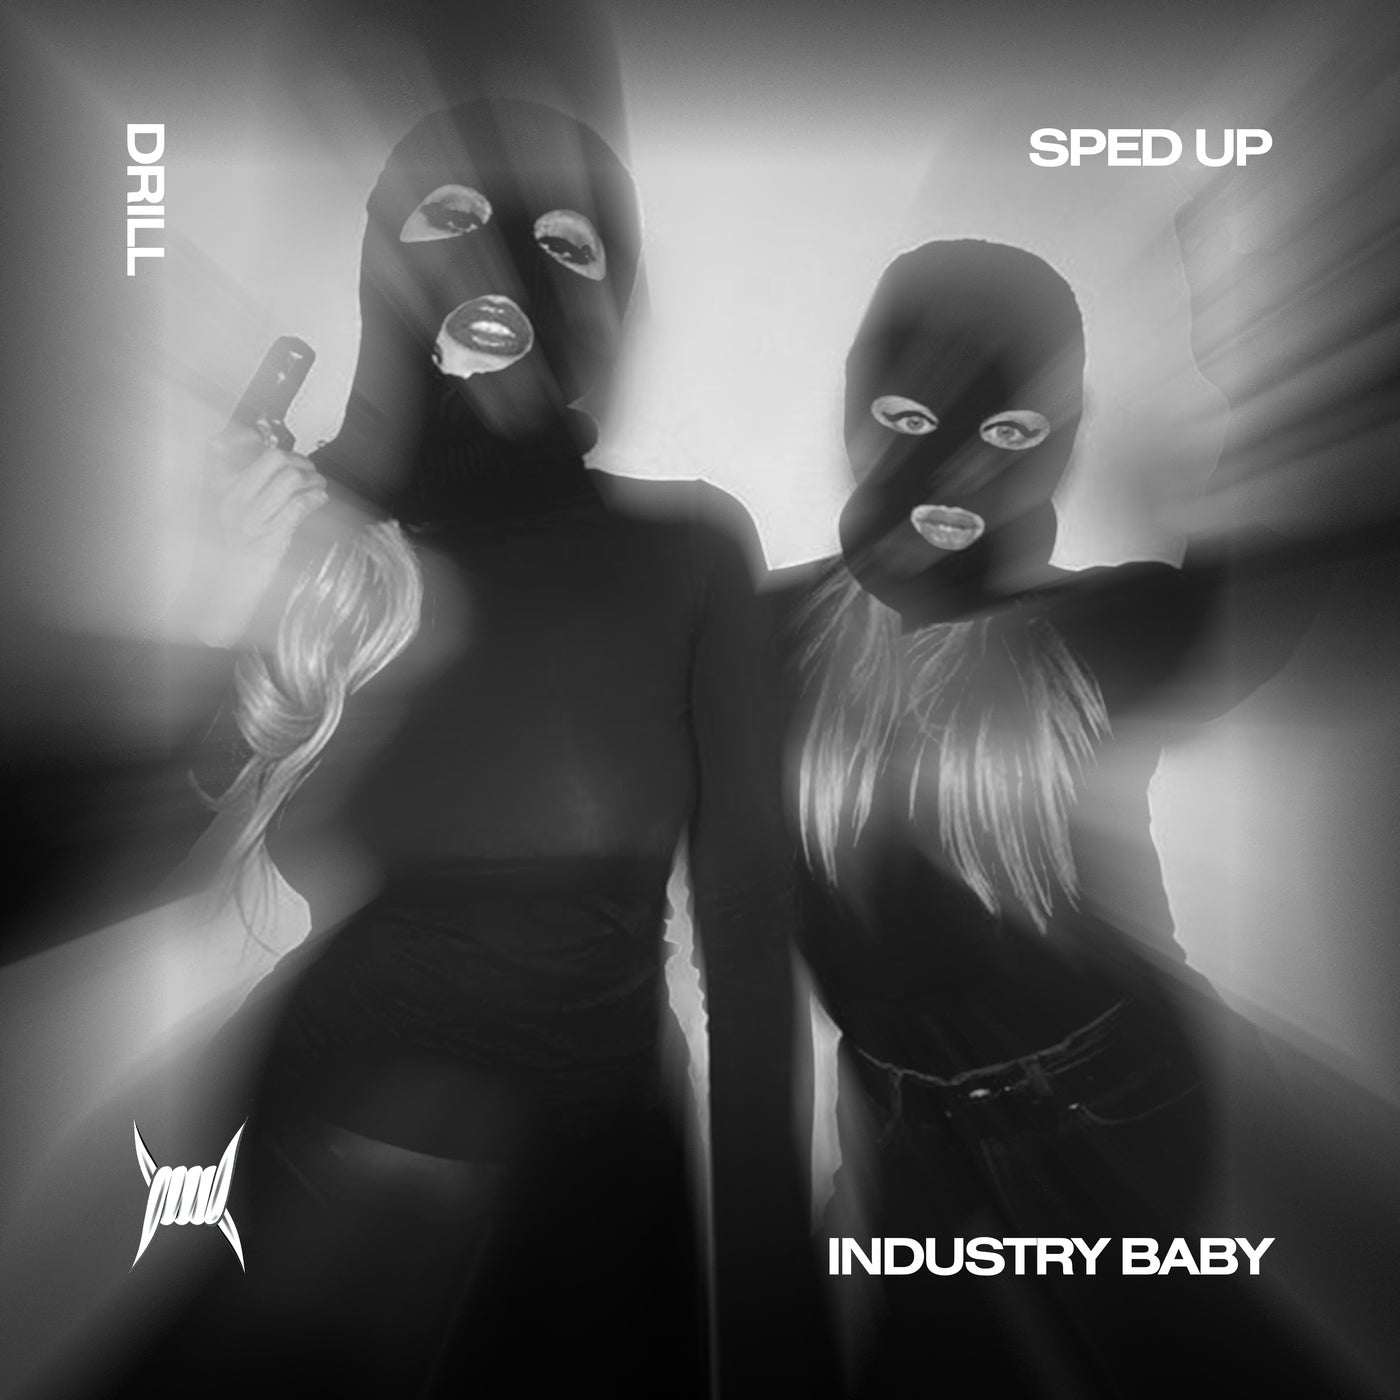 INDUSTRY BABY (DRILL SPED UP)